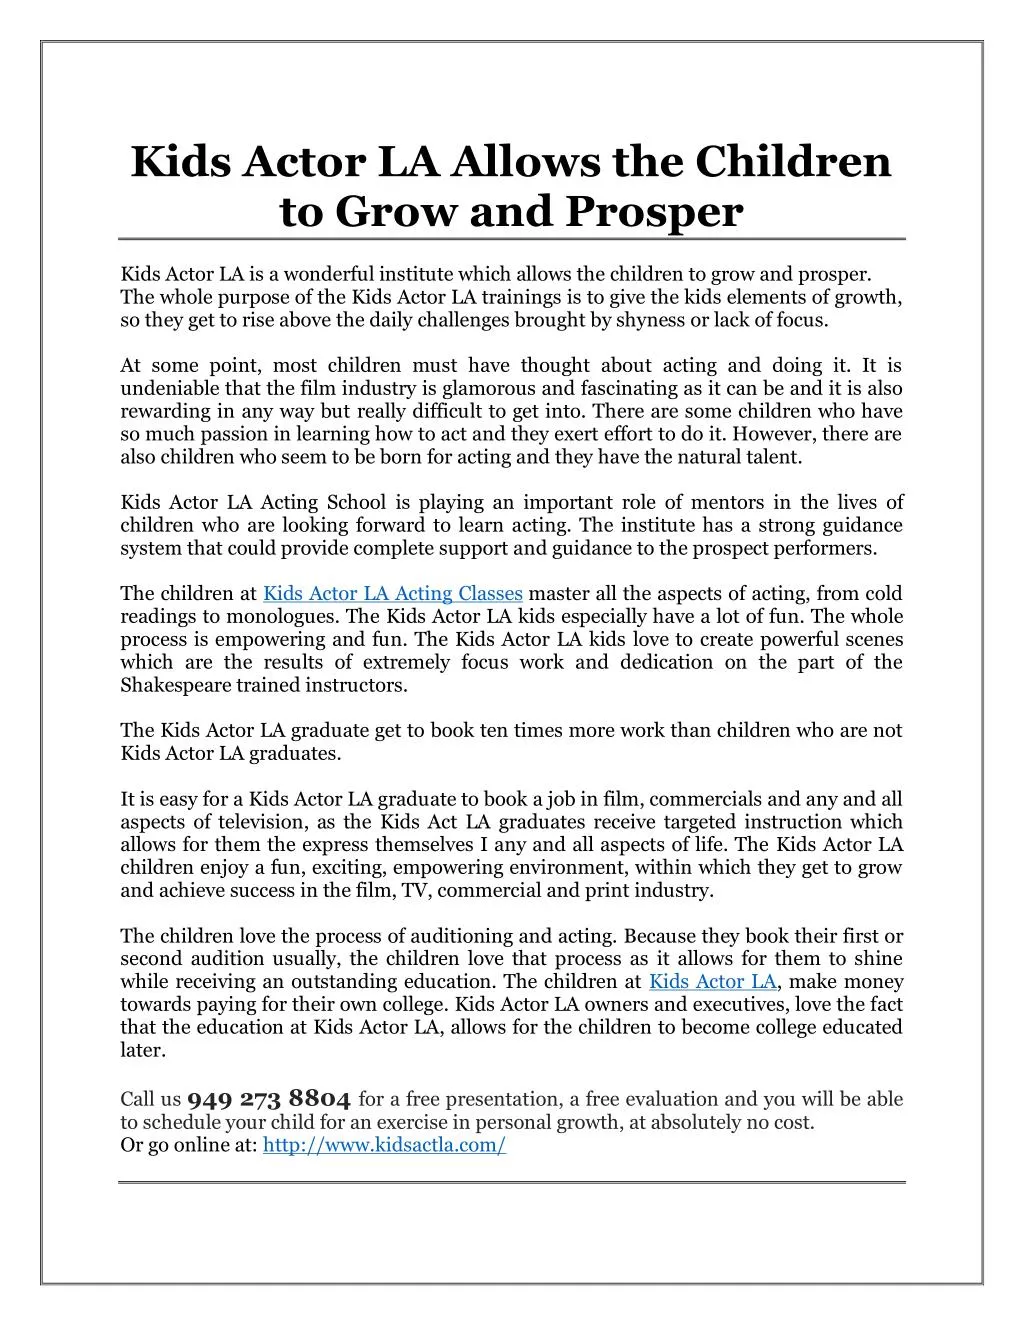 kids actor la allows the children to grow